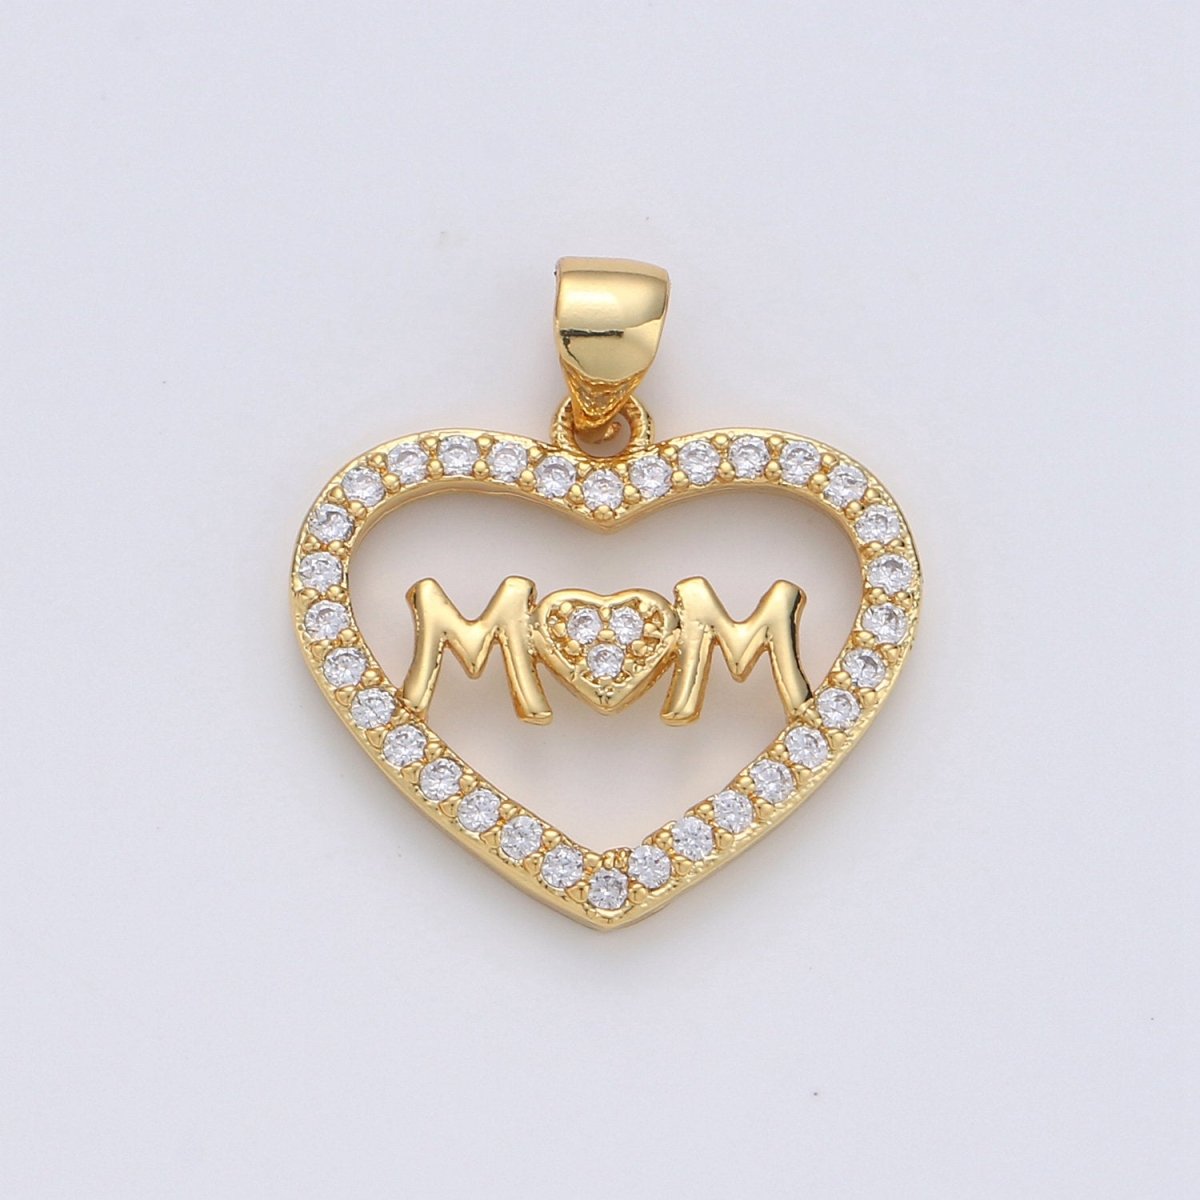 14k Gold Fill Micro Pave Mother Charm - Mom Necklace Charm - Mother Bracelet Charm - Mother's Day Gifts - Mom Letter Necklace Pendant I-667 - DLUXCA